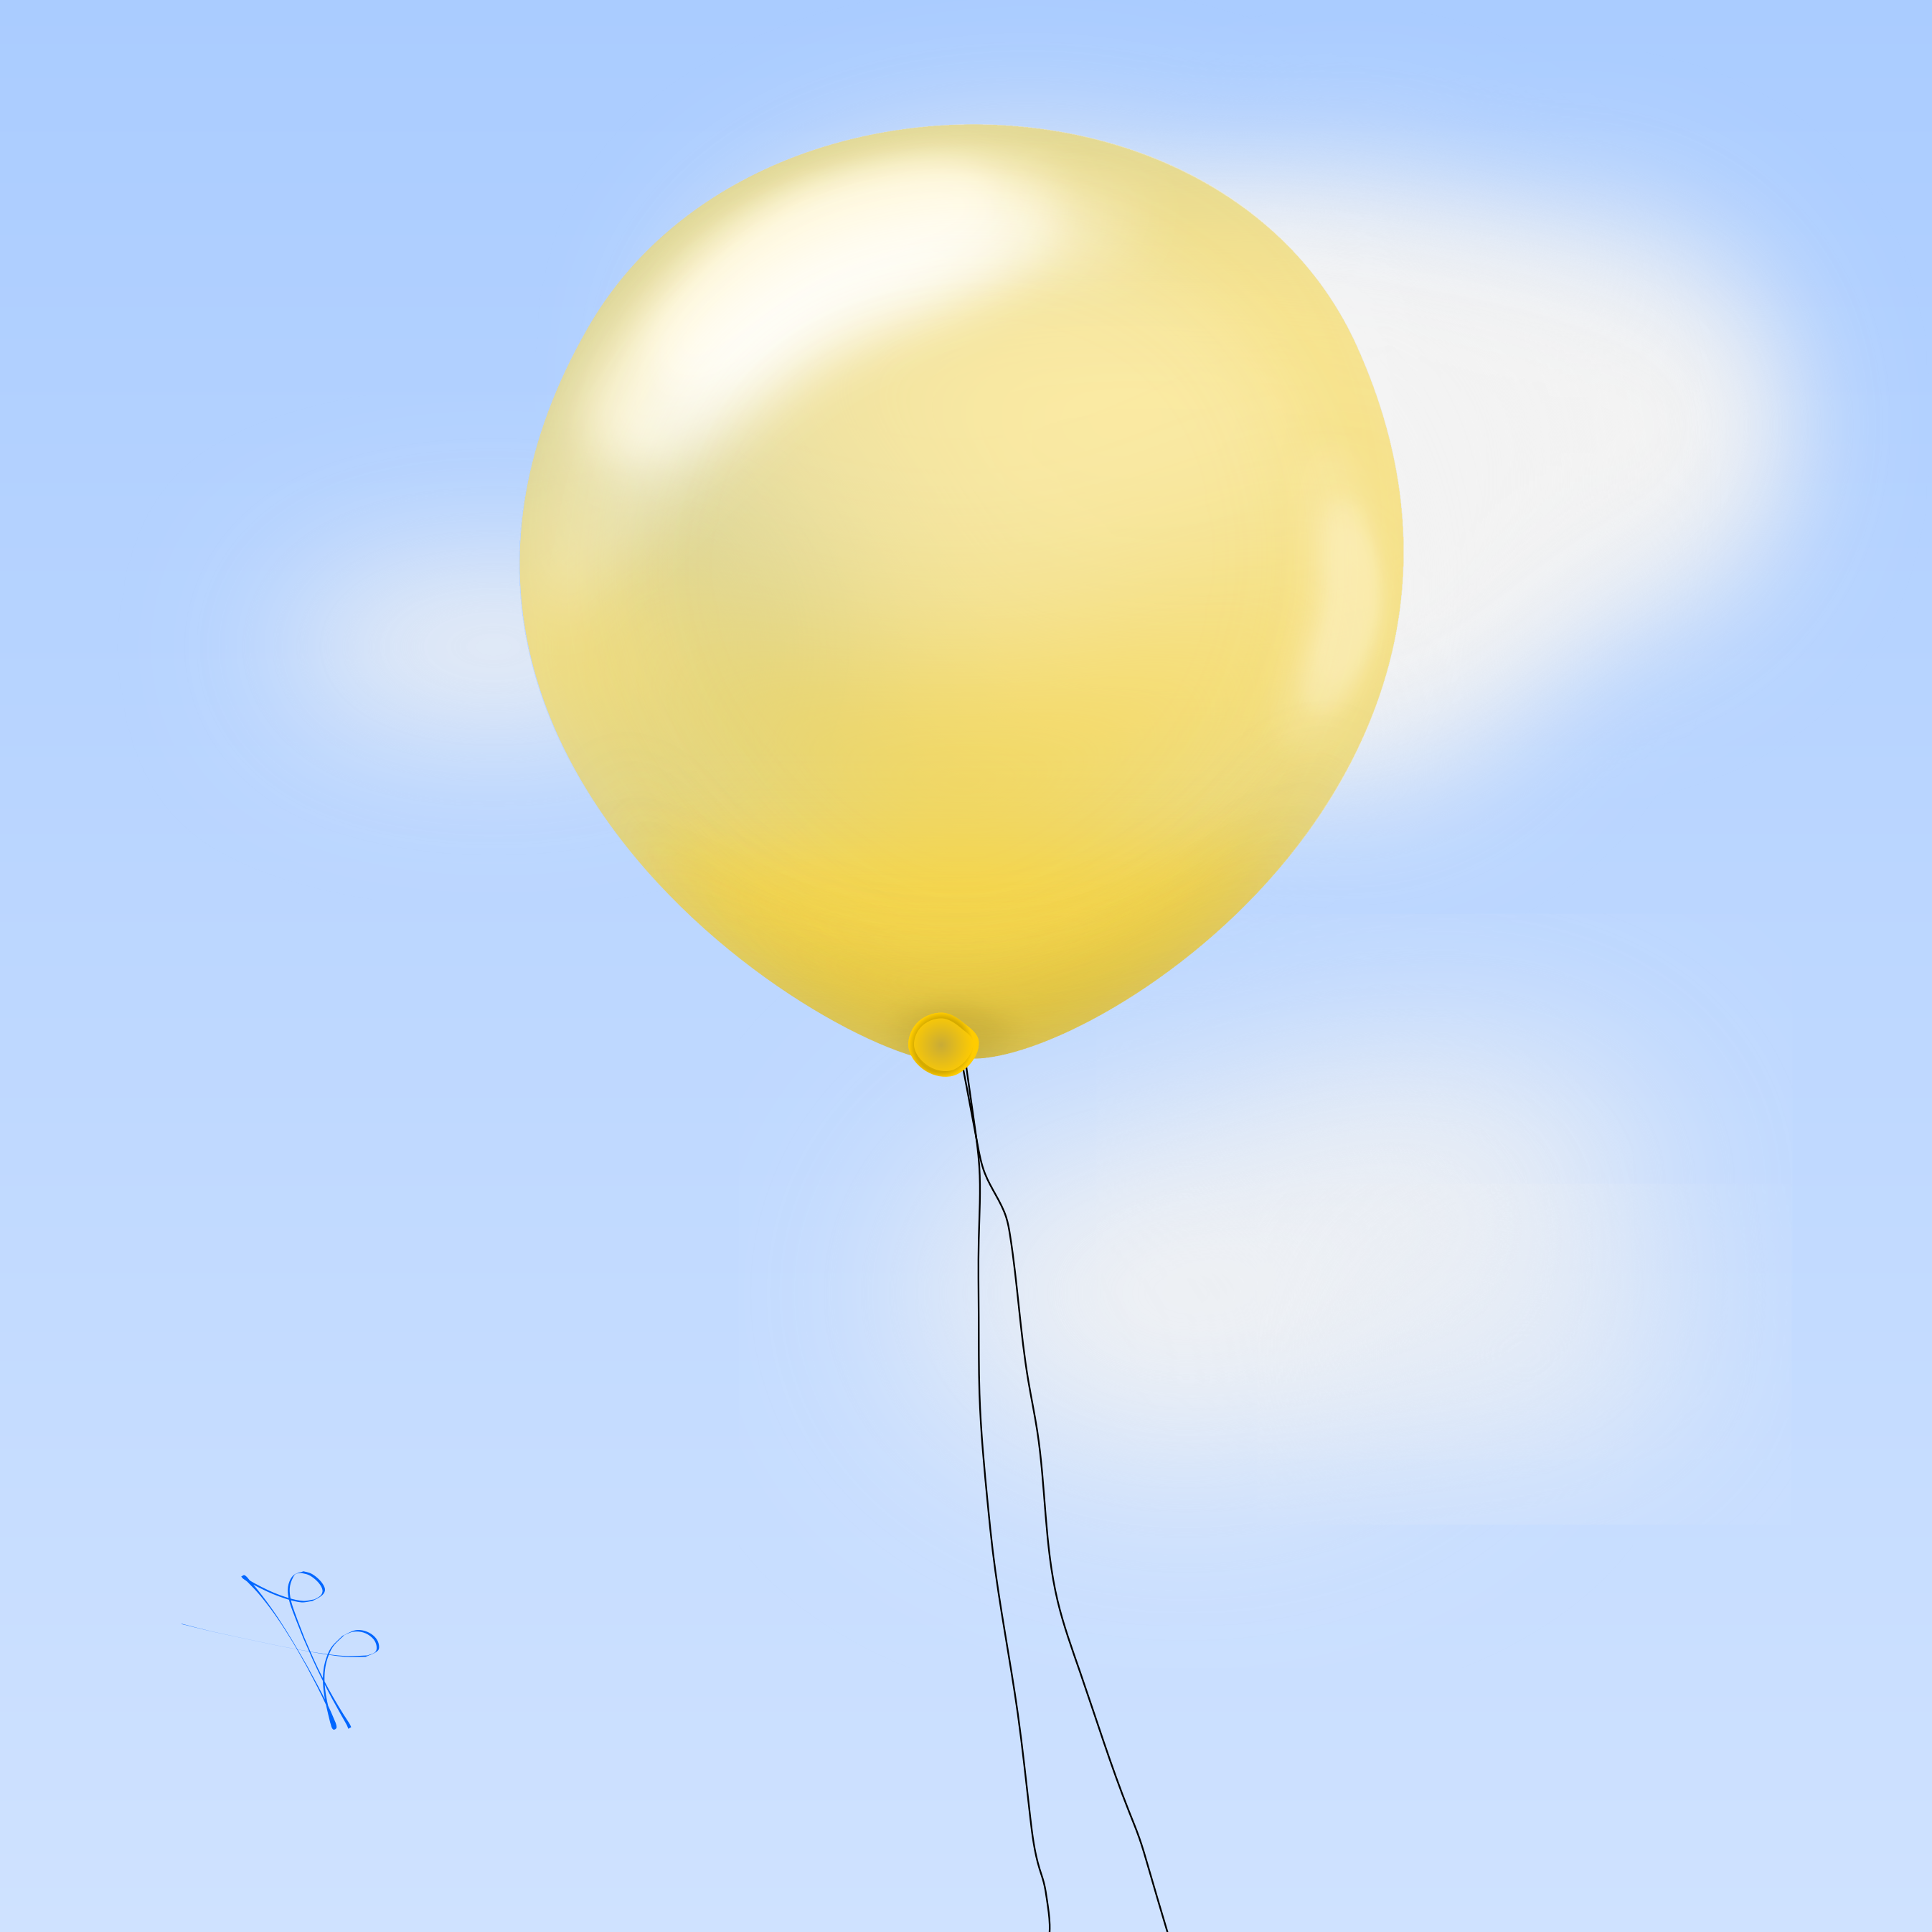 Yellow baloon in the blue sky. What do you think about this work ...